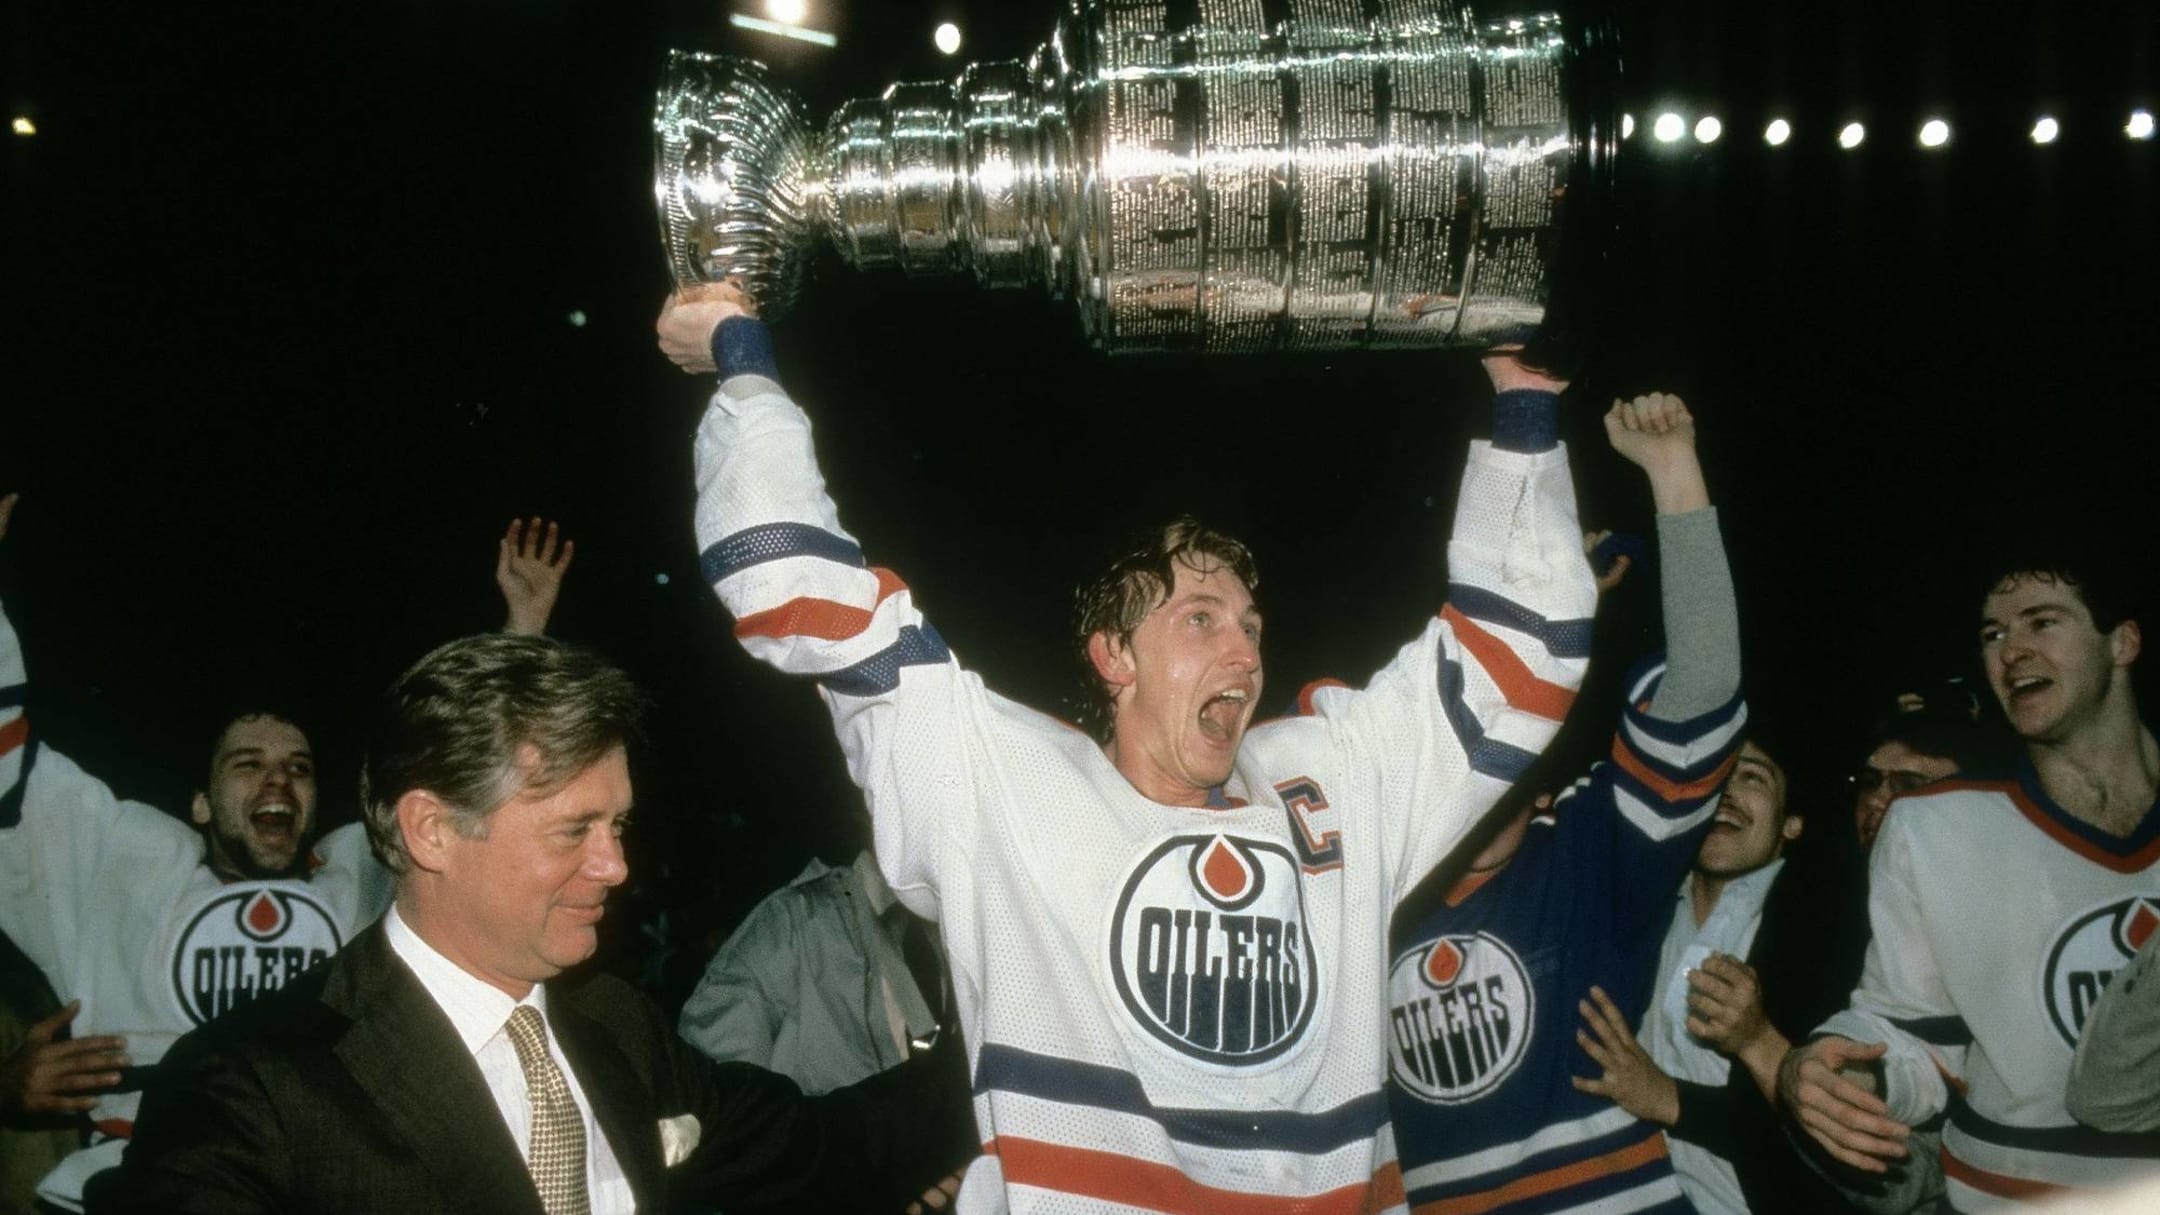 Wayne Gretzky, Baseball Hall of Fame among owners duped by altered